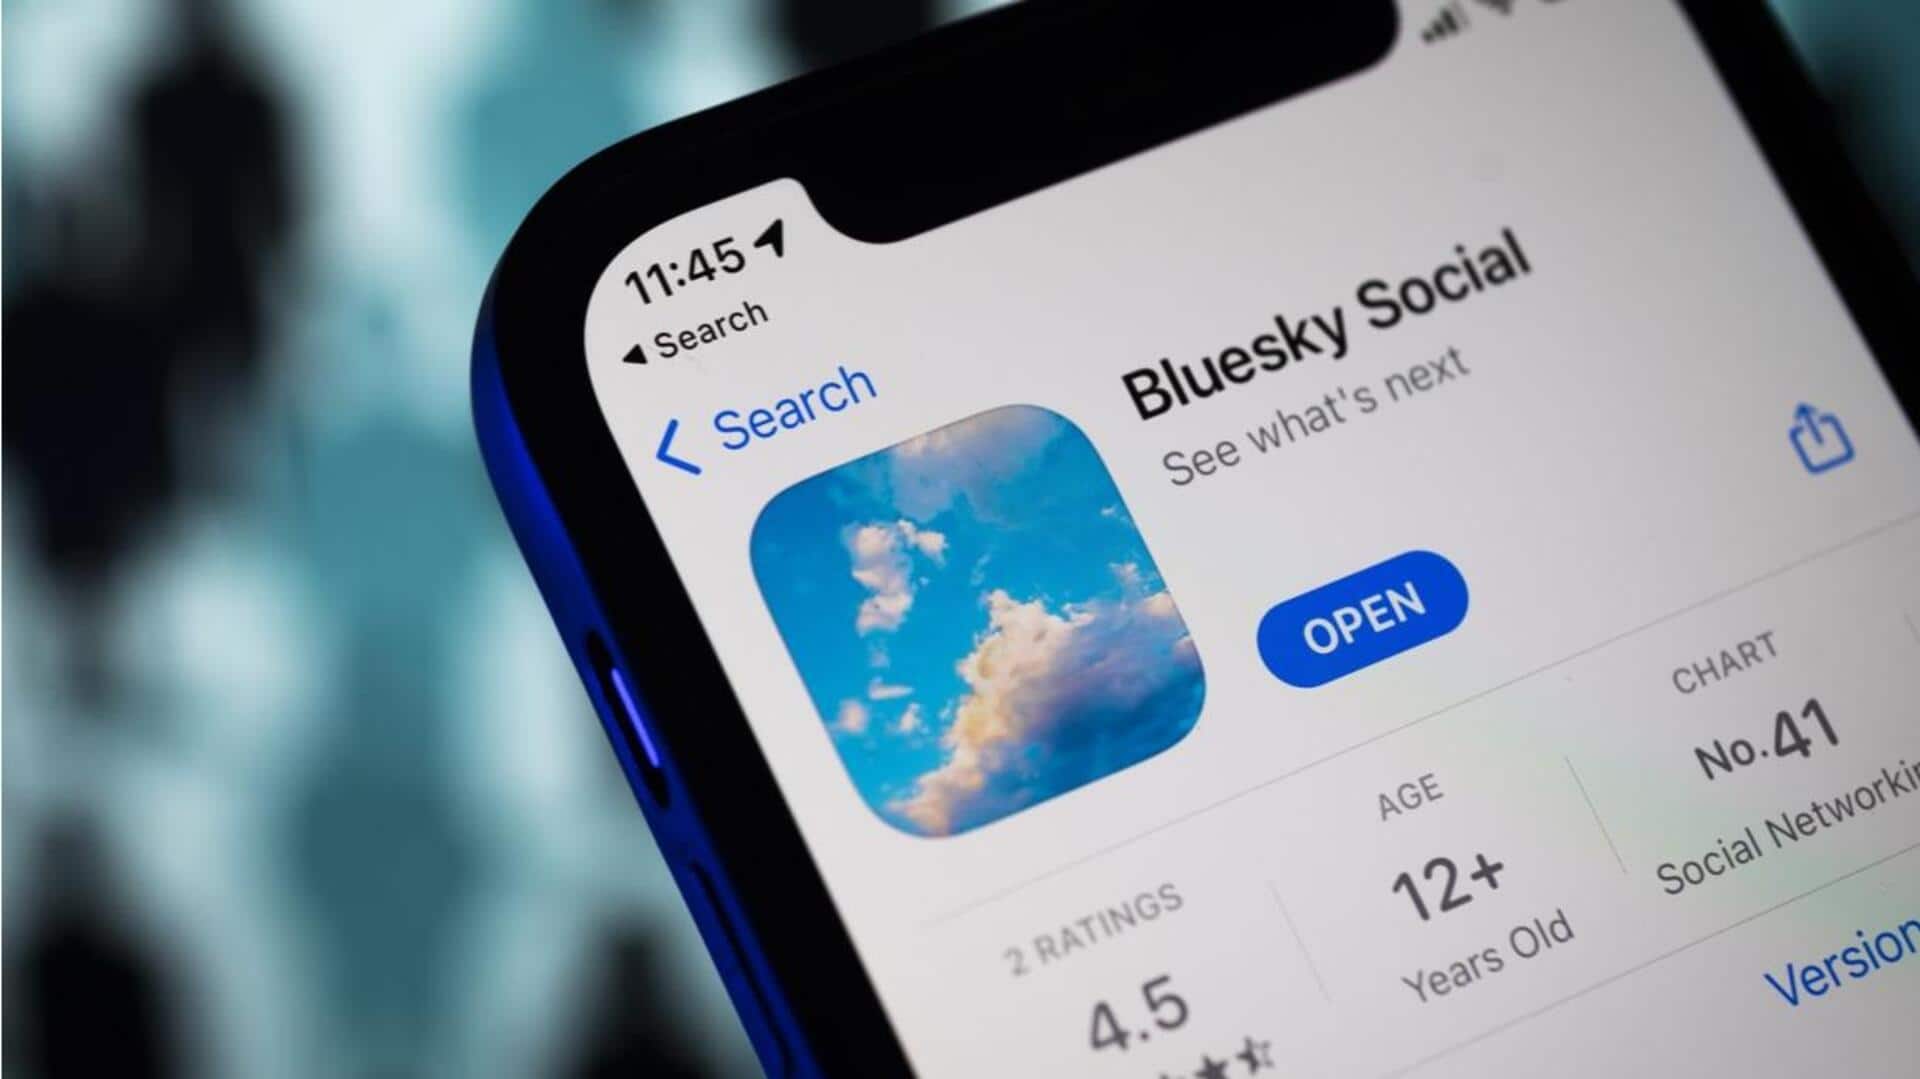 Bluesky announces new features including DMs and video support